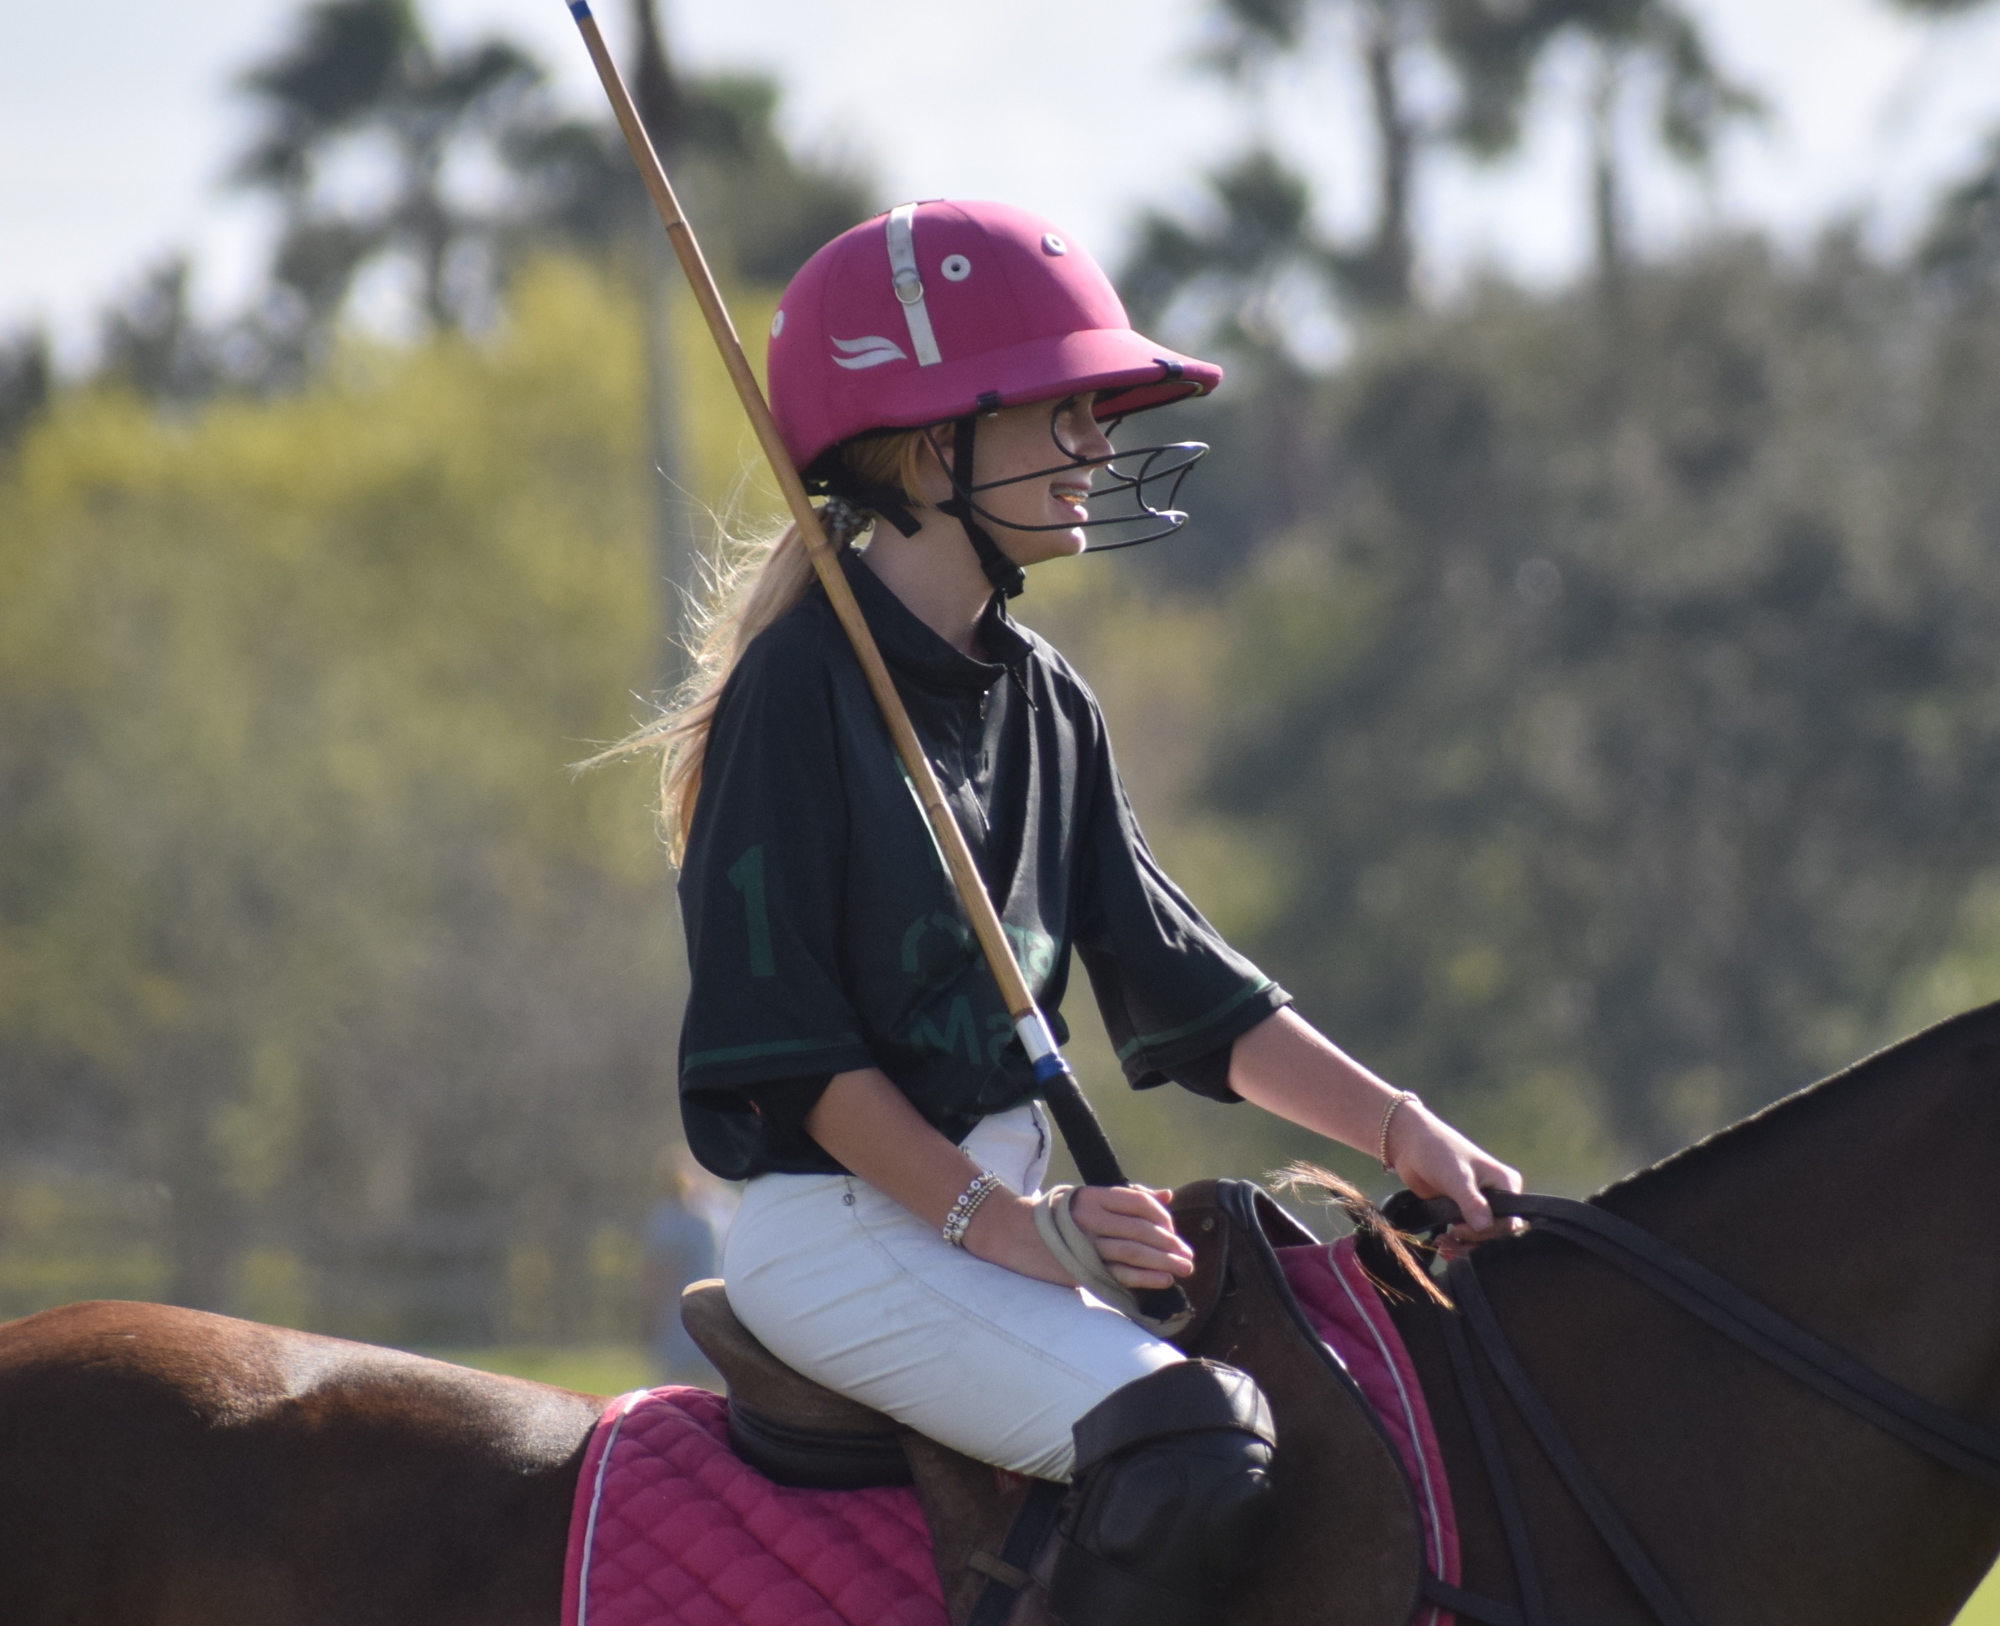 On Jan. 2, Hanna Hornung was the only female on the field during featured polo action at the Sarasota Polo Club, and the only teen.